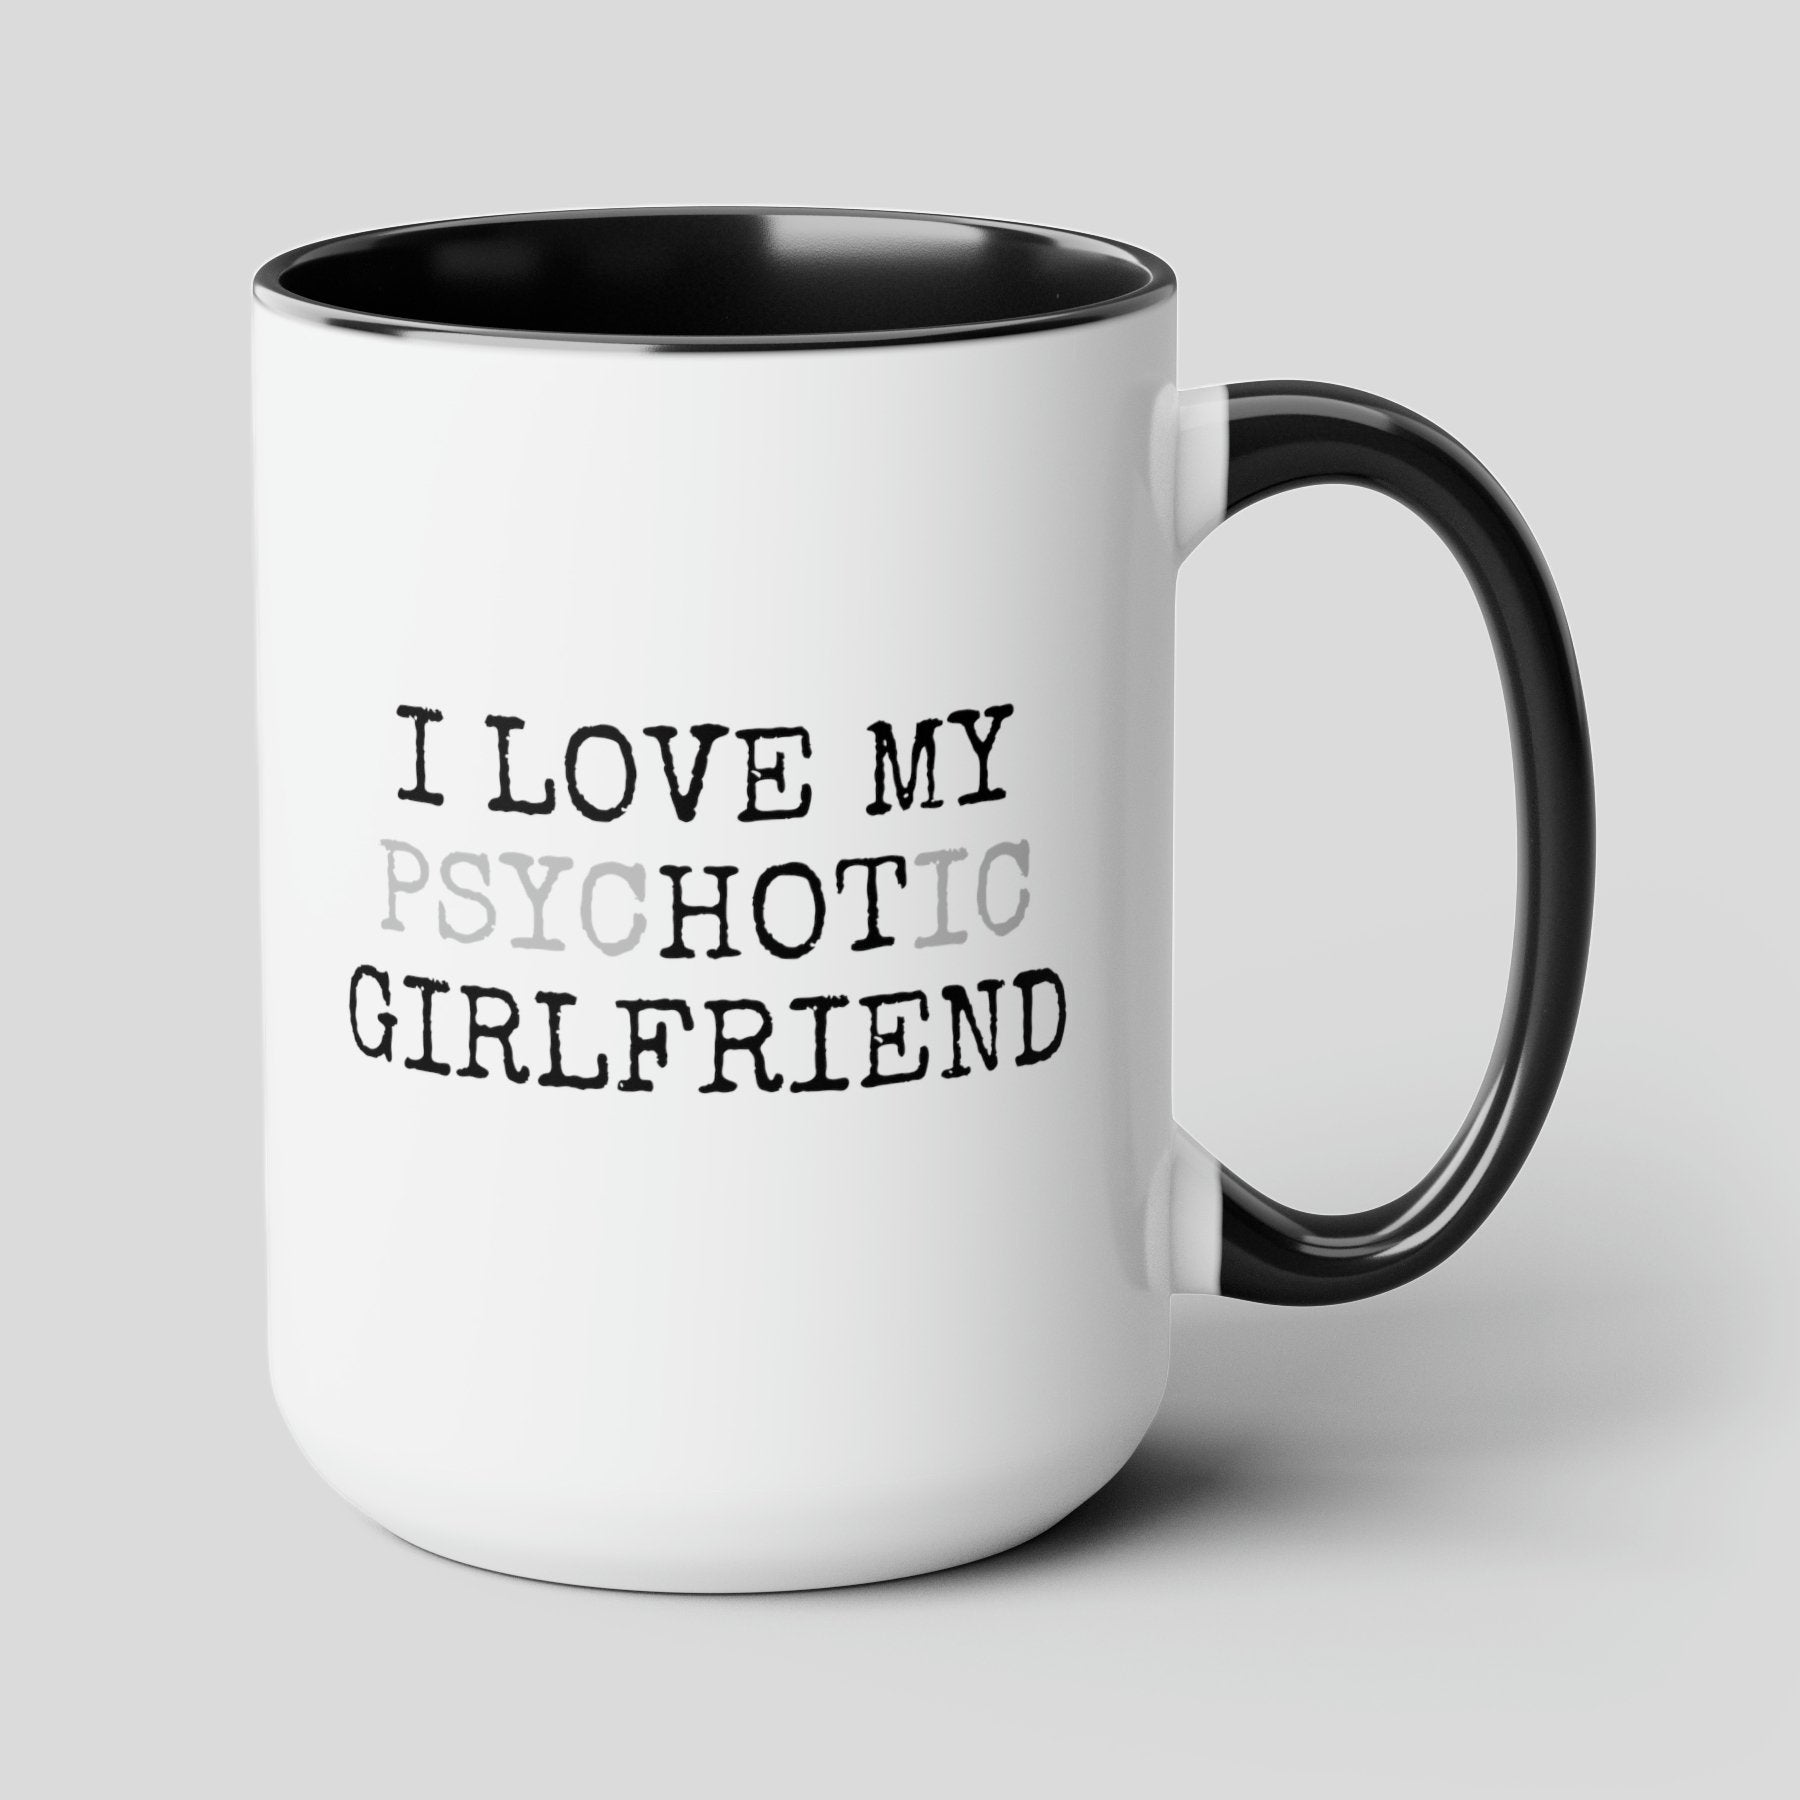 I Love My Hot Psychotic Girlfriend 15oz white with black accent funny large coffee mug gift for him boyfriend husband rude curse valentines anniversary waveywares wavey wares wavywares wavy wares cover